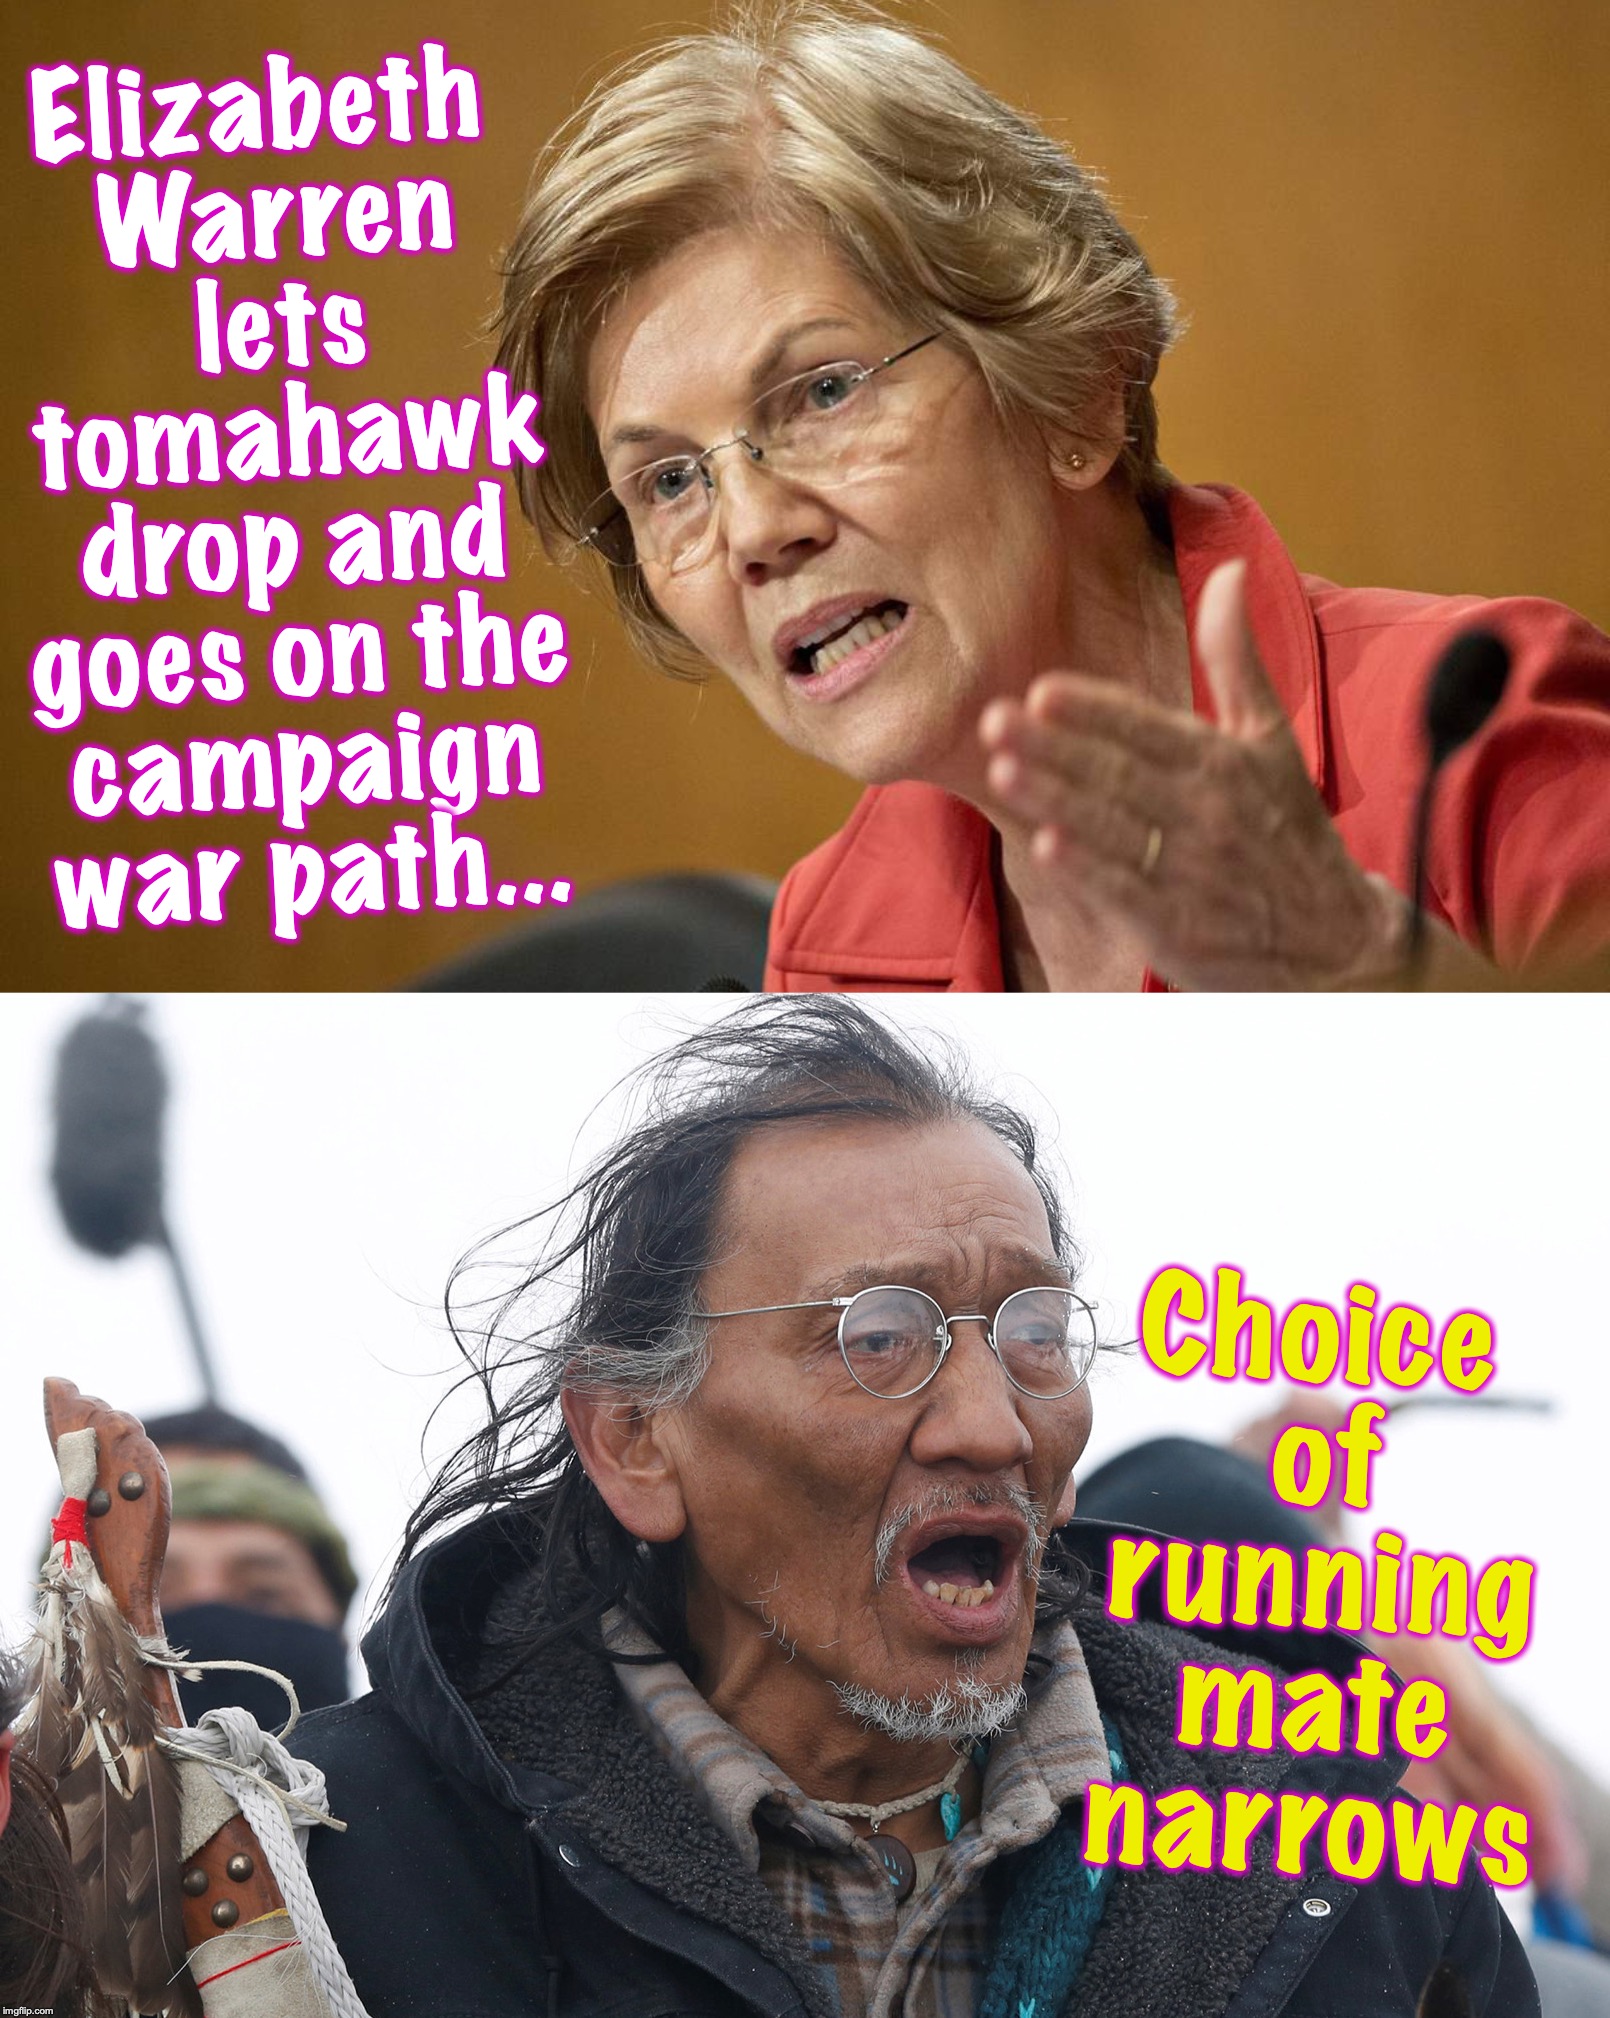 A custom-made match: the phony Native American, and the phony Vietnam War Vet  [warning: satire] | Elizabeth Warren lets tomahawk drop and goes on the campaign war path... Choice of running mate narrows | image tagged in elizabeth warren,native american | made w/ Imgflip meme maker